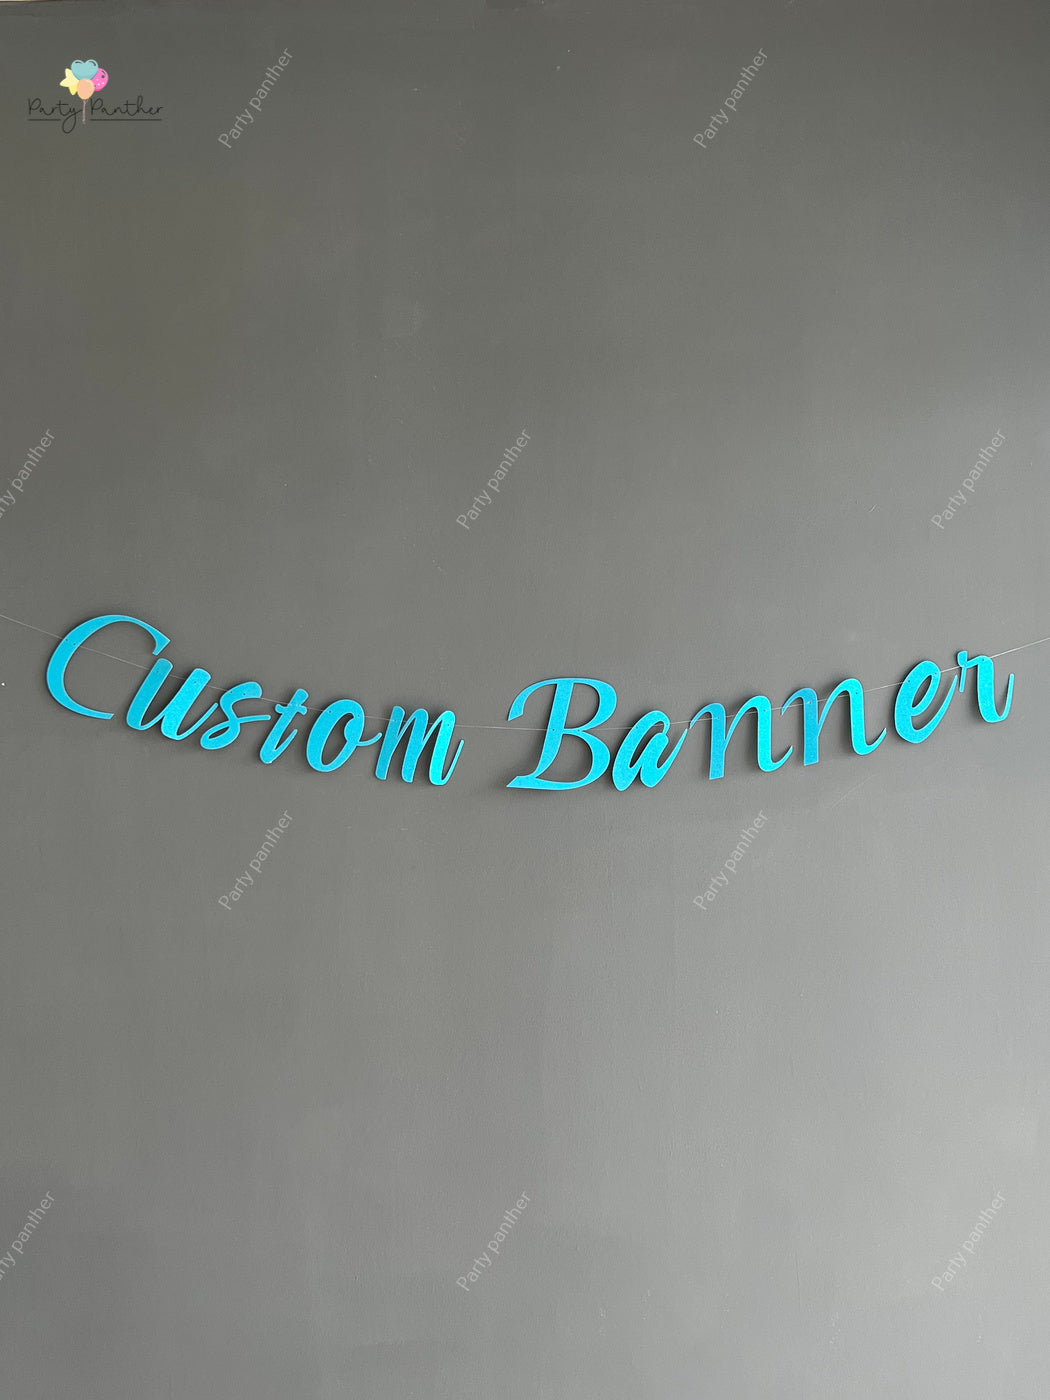 Customised Cursive Blue Glitter Banner - Personalized Handmade party decorations for all occasions